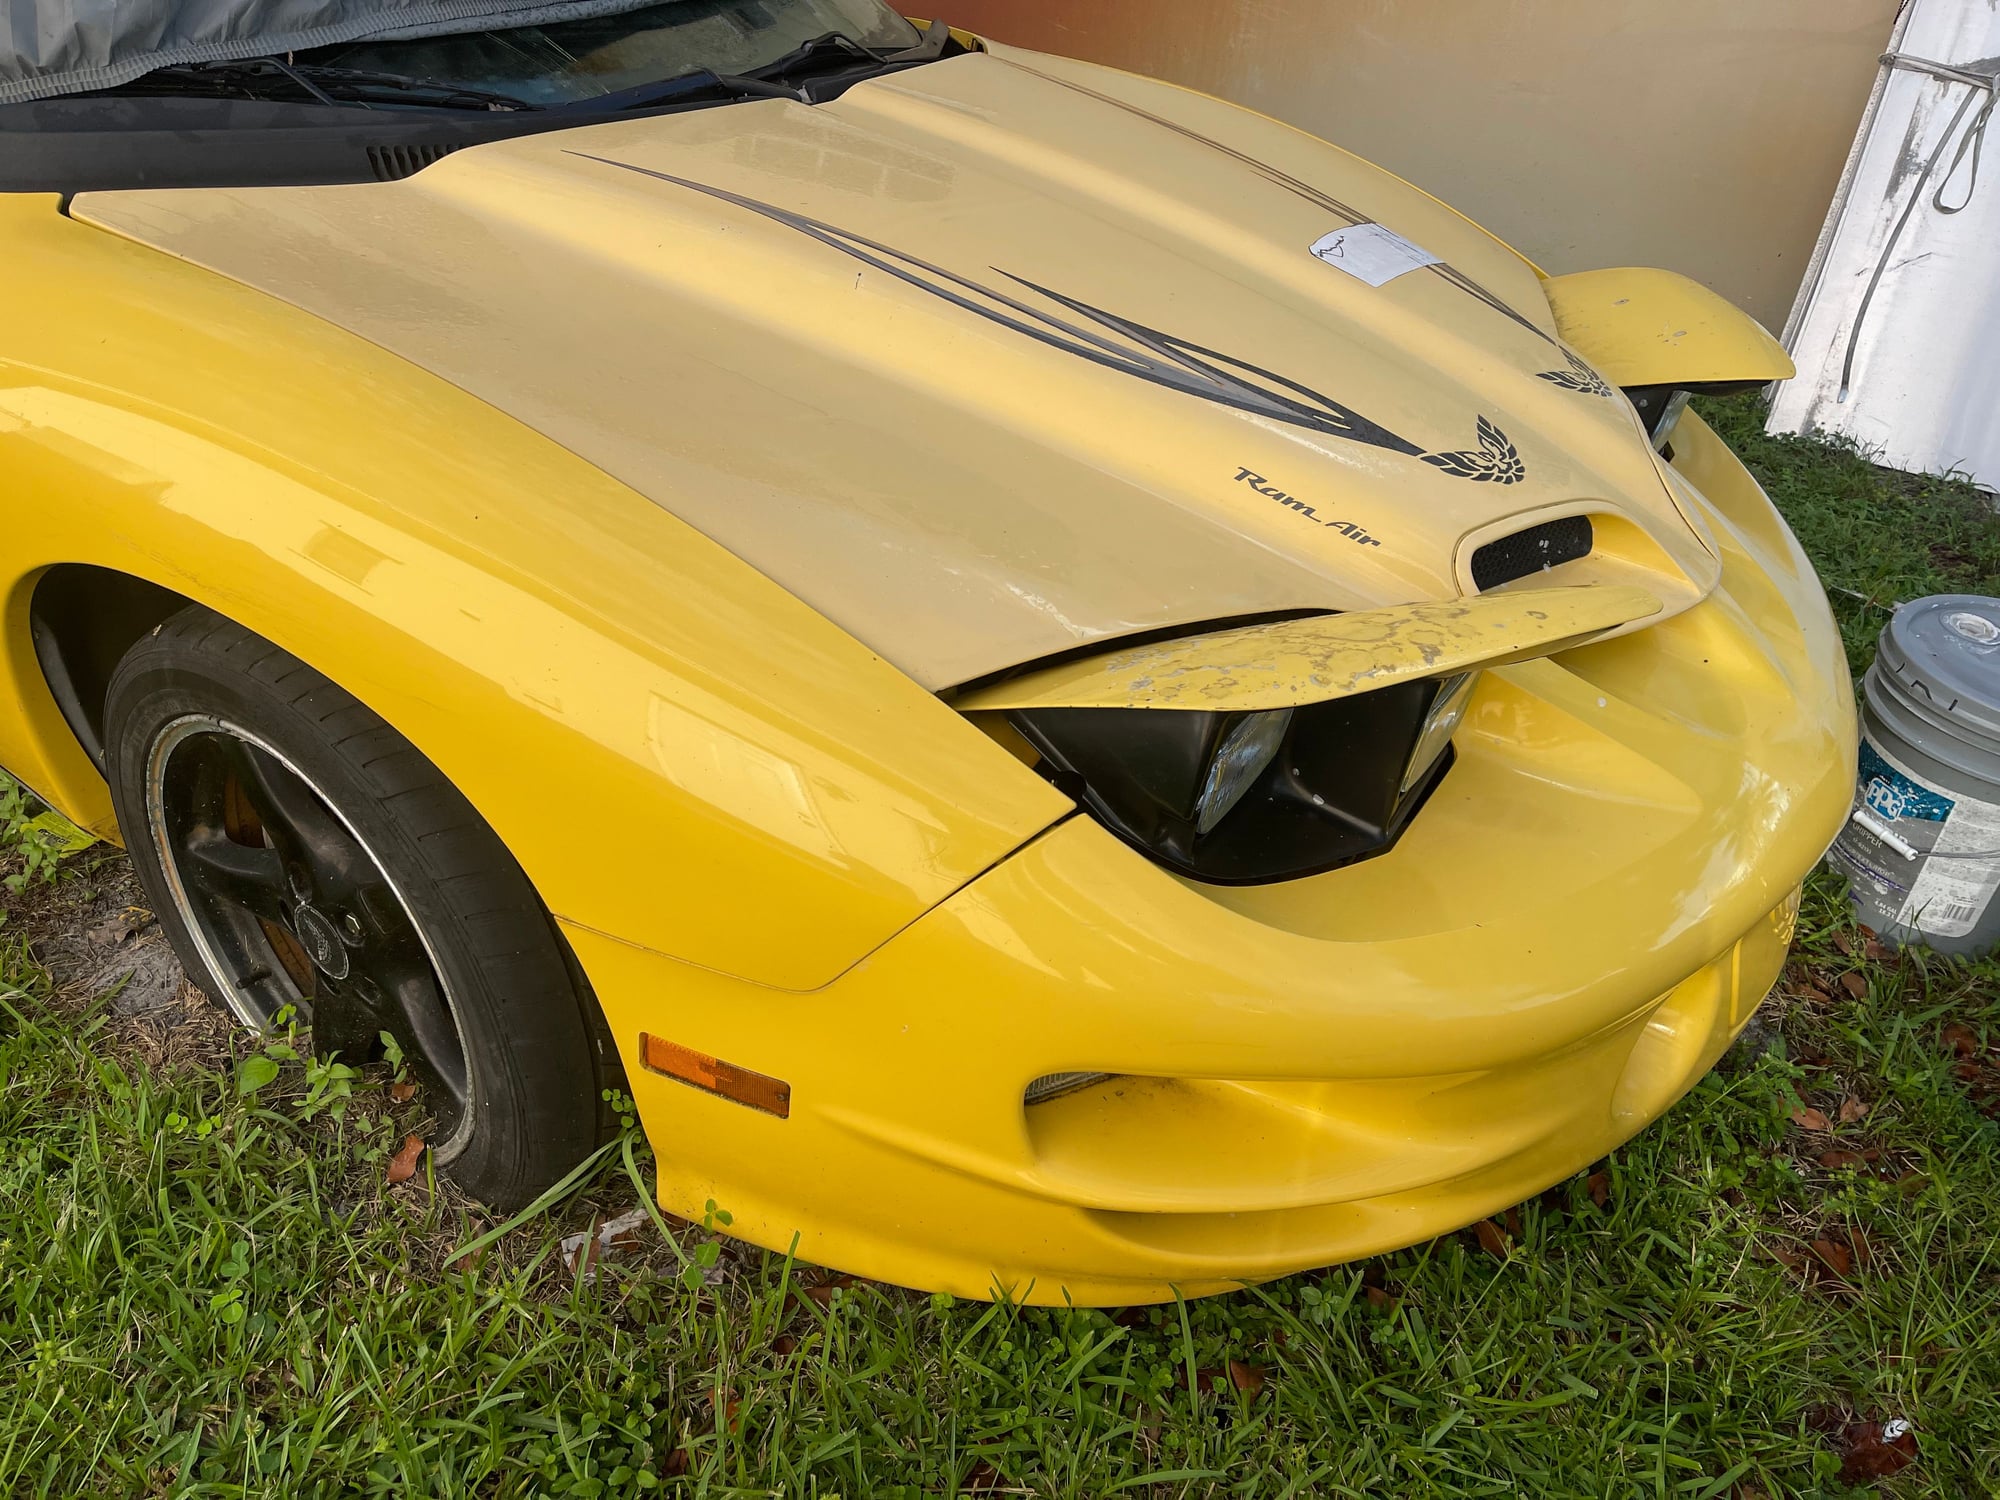 2002 Pontiac Firebird - 2002 ws6 parts car on ebay - Used - VIN 262FV22G622137452 - 94,000 Miles - 8 cyl - 2WD - Automatic - Coupe - Yellow - Hollywood, FL 33024, United States